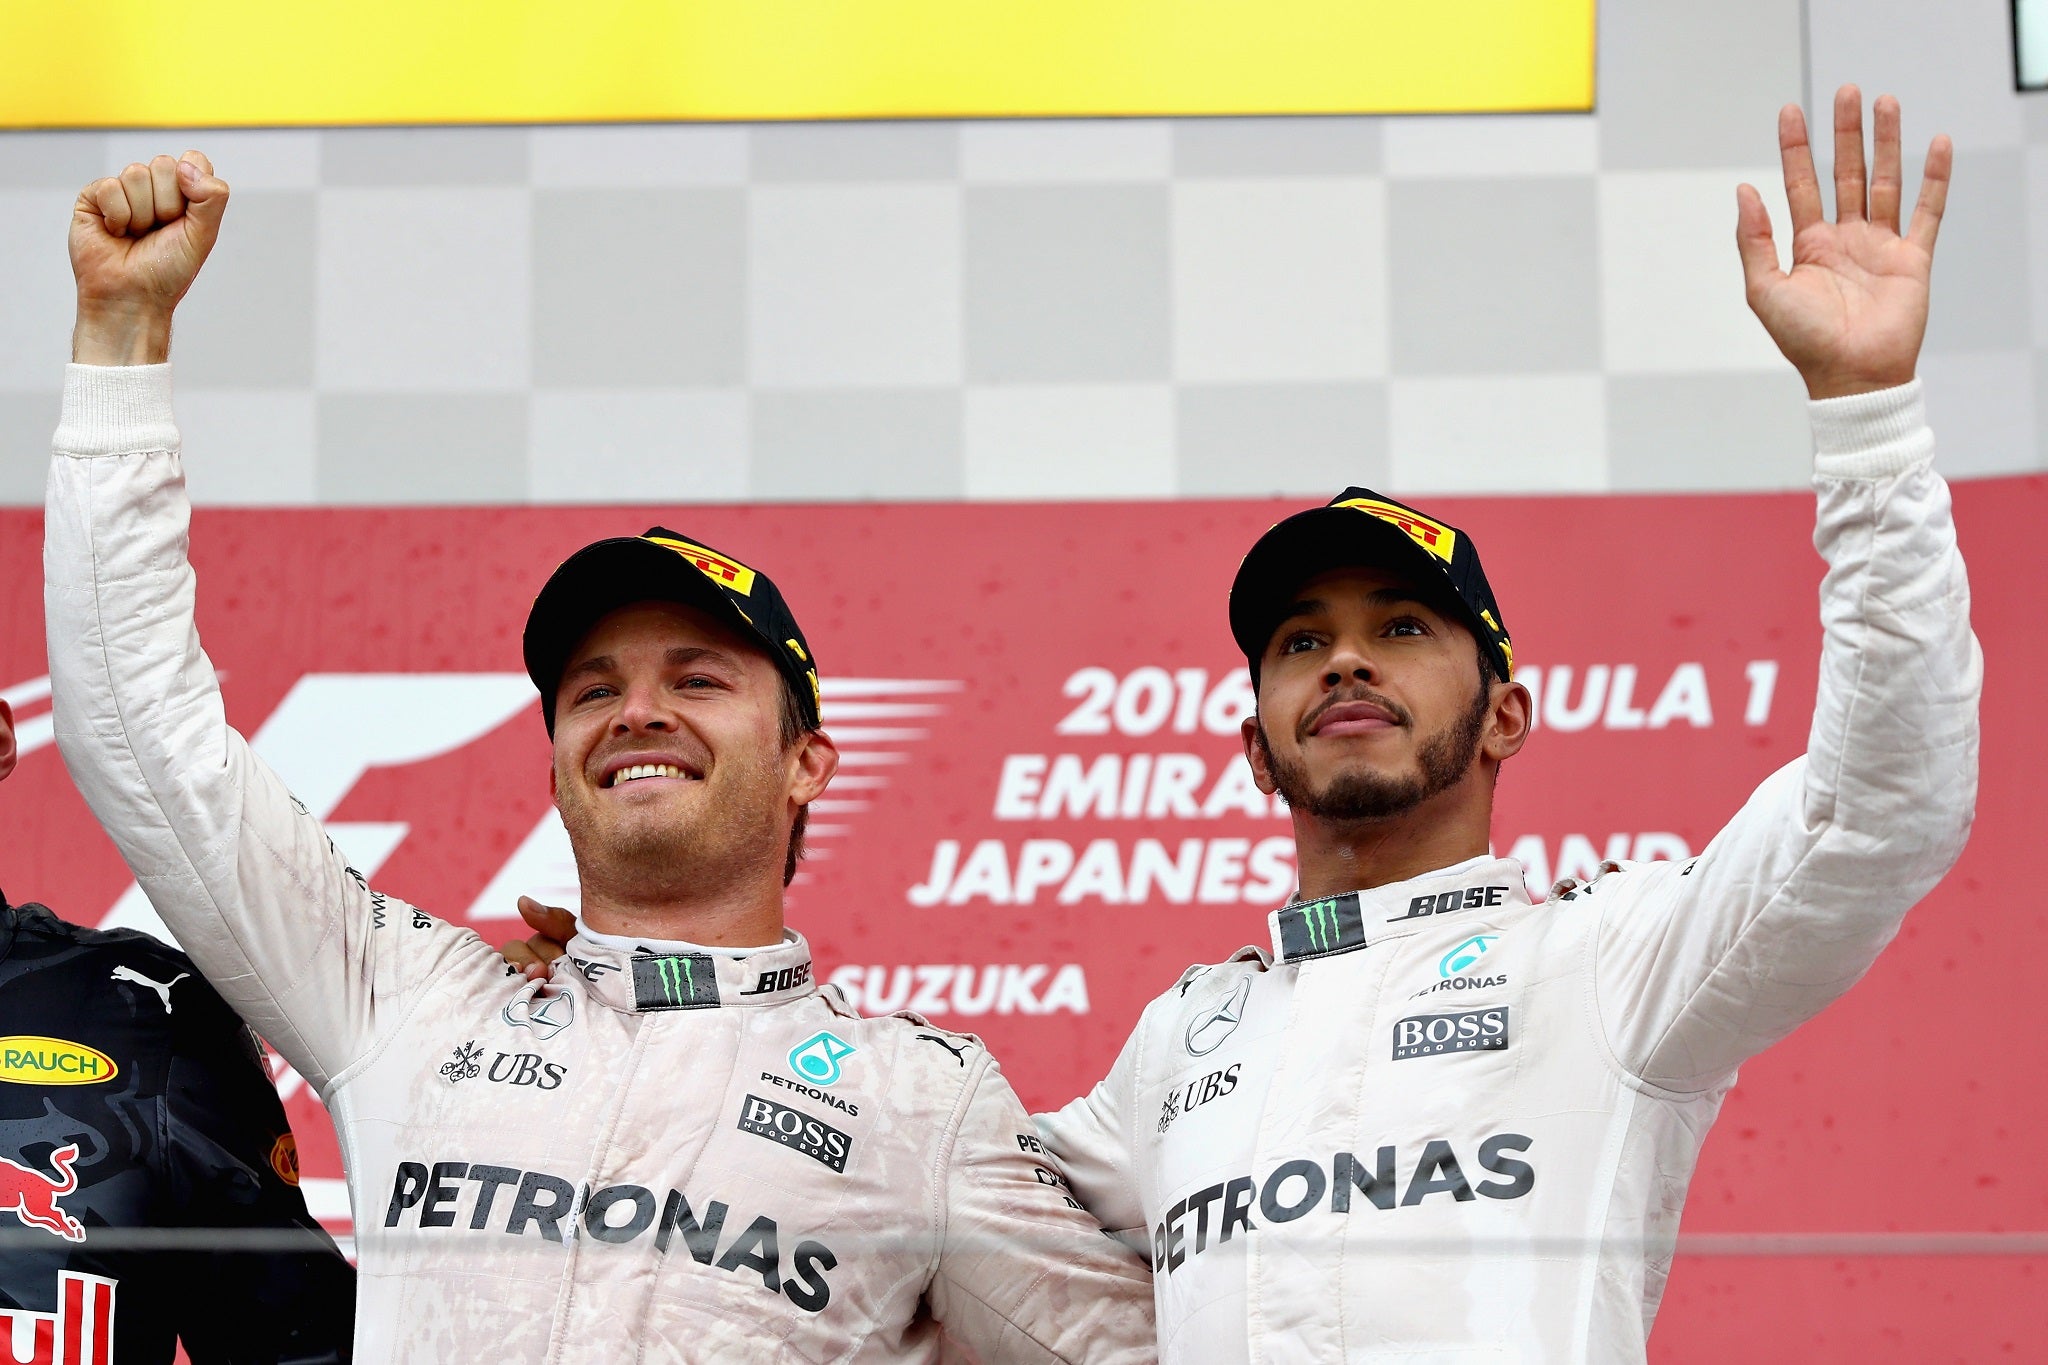 &#13;
The result secured a third consecutive Constructors' Championship for Mercedes &#13;